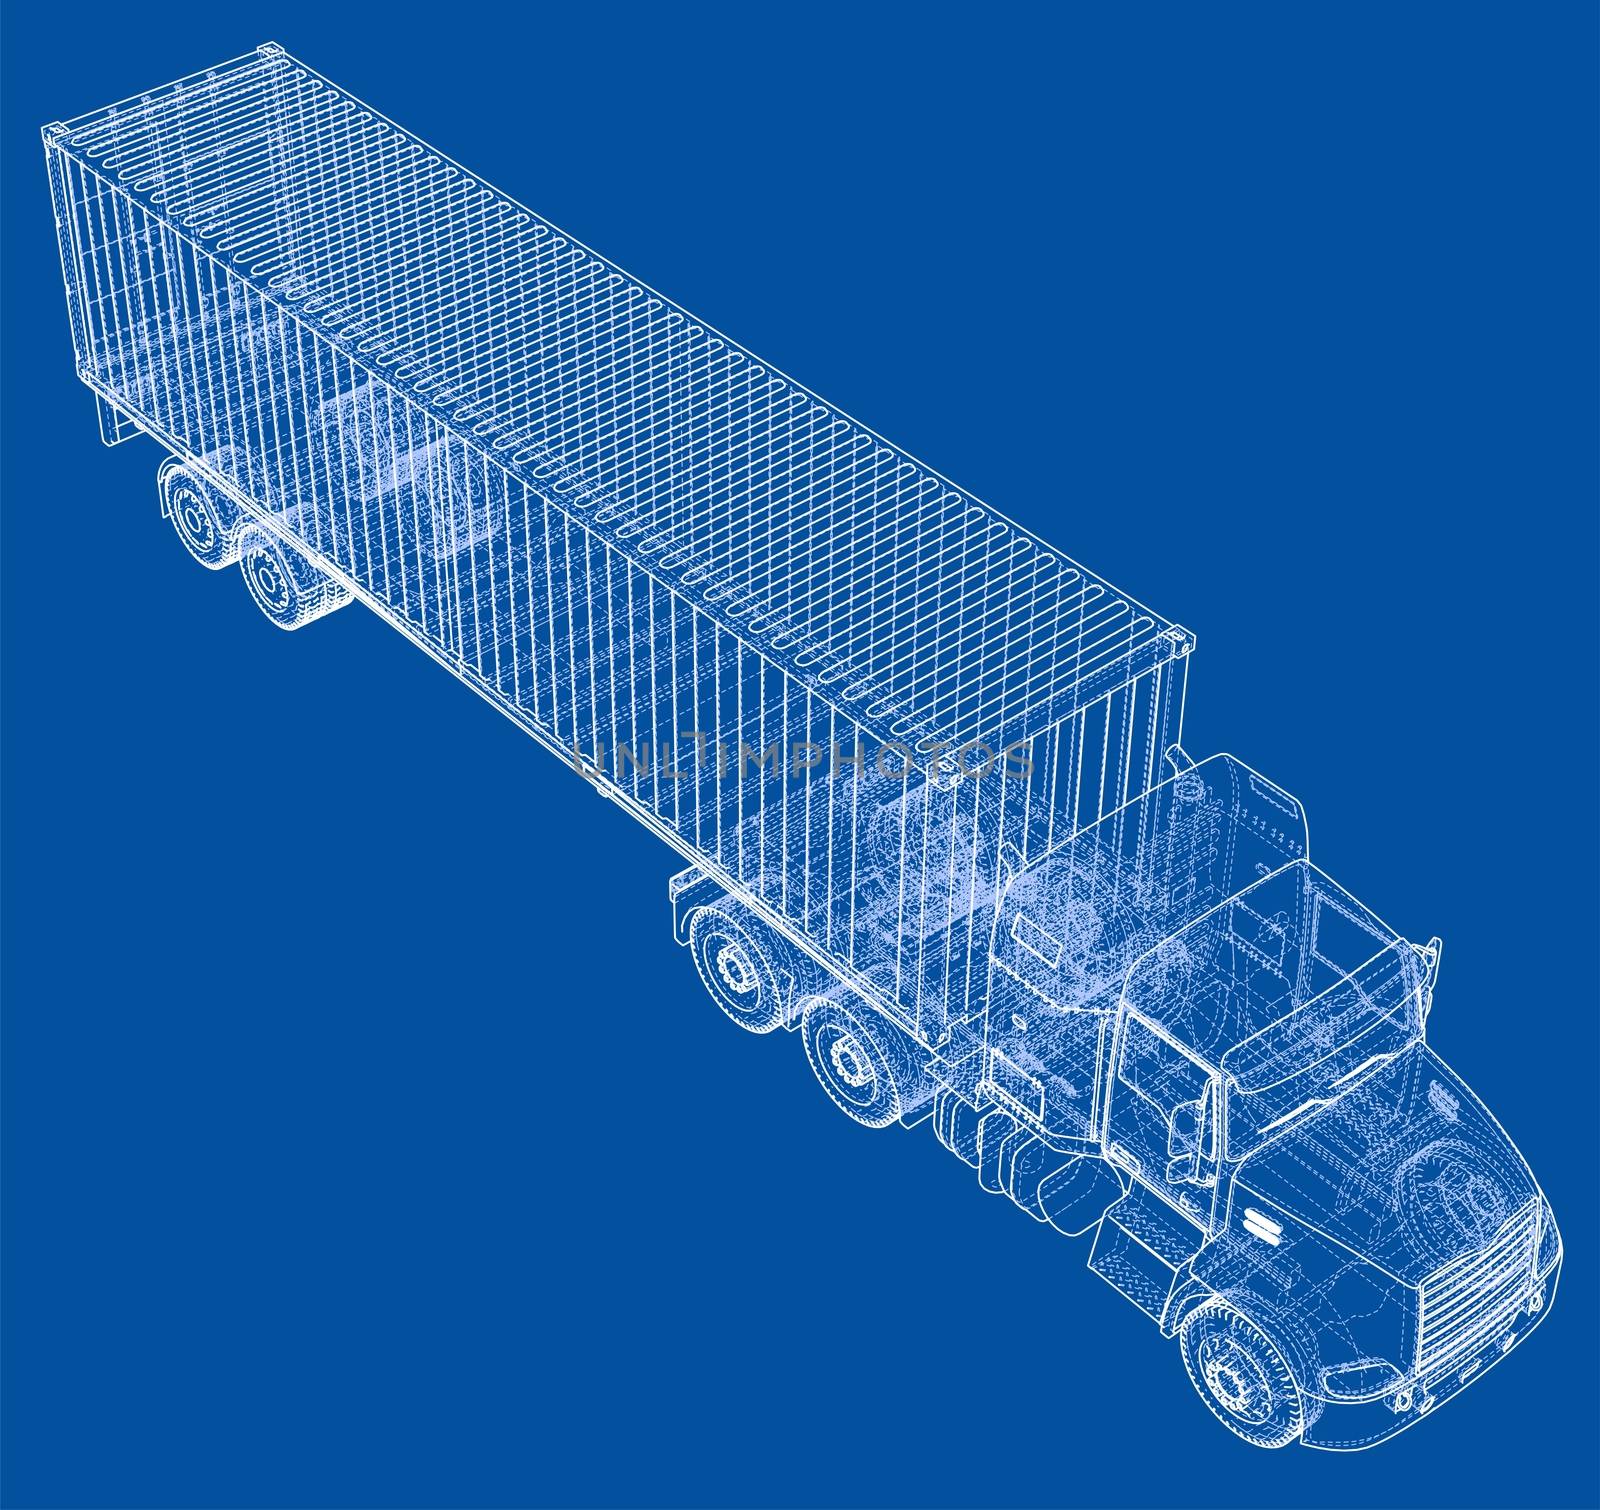 Truck with semitrailer. Wire-frame style. 3d illustration